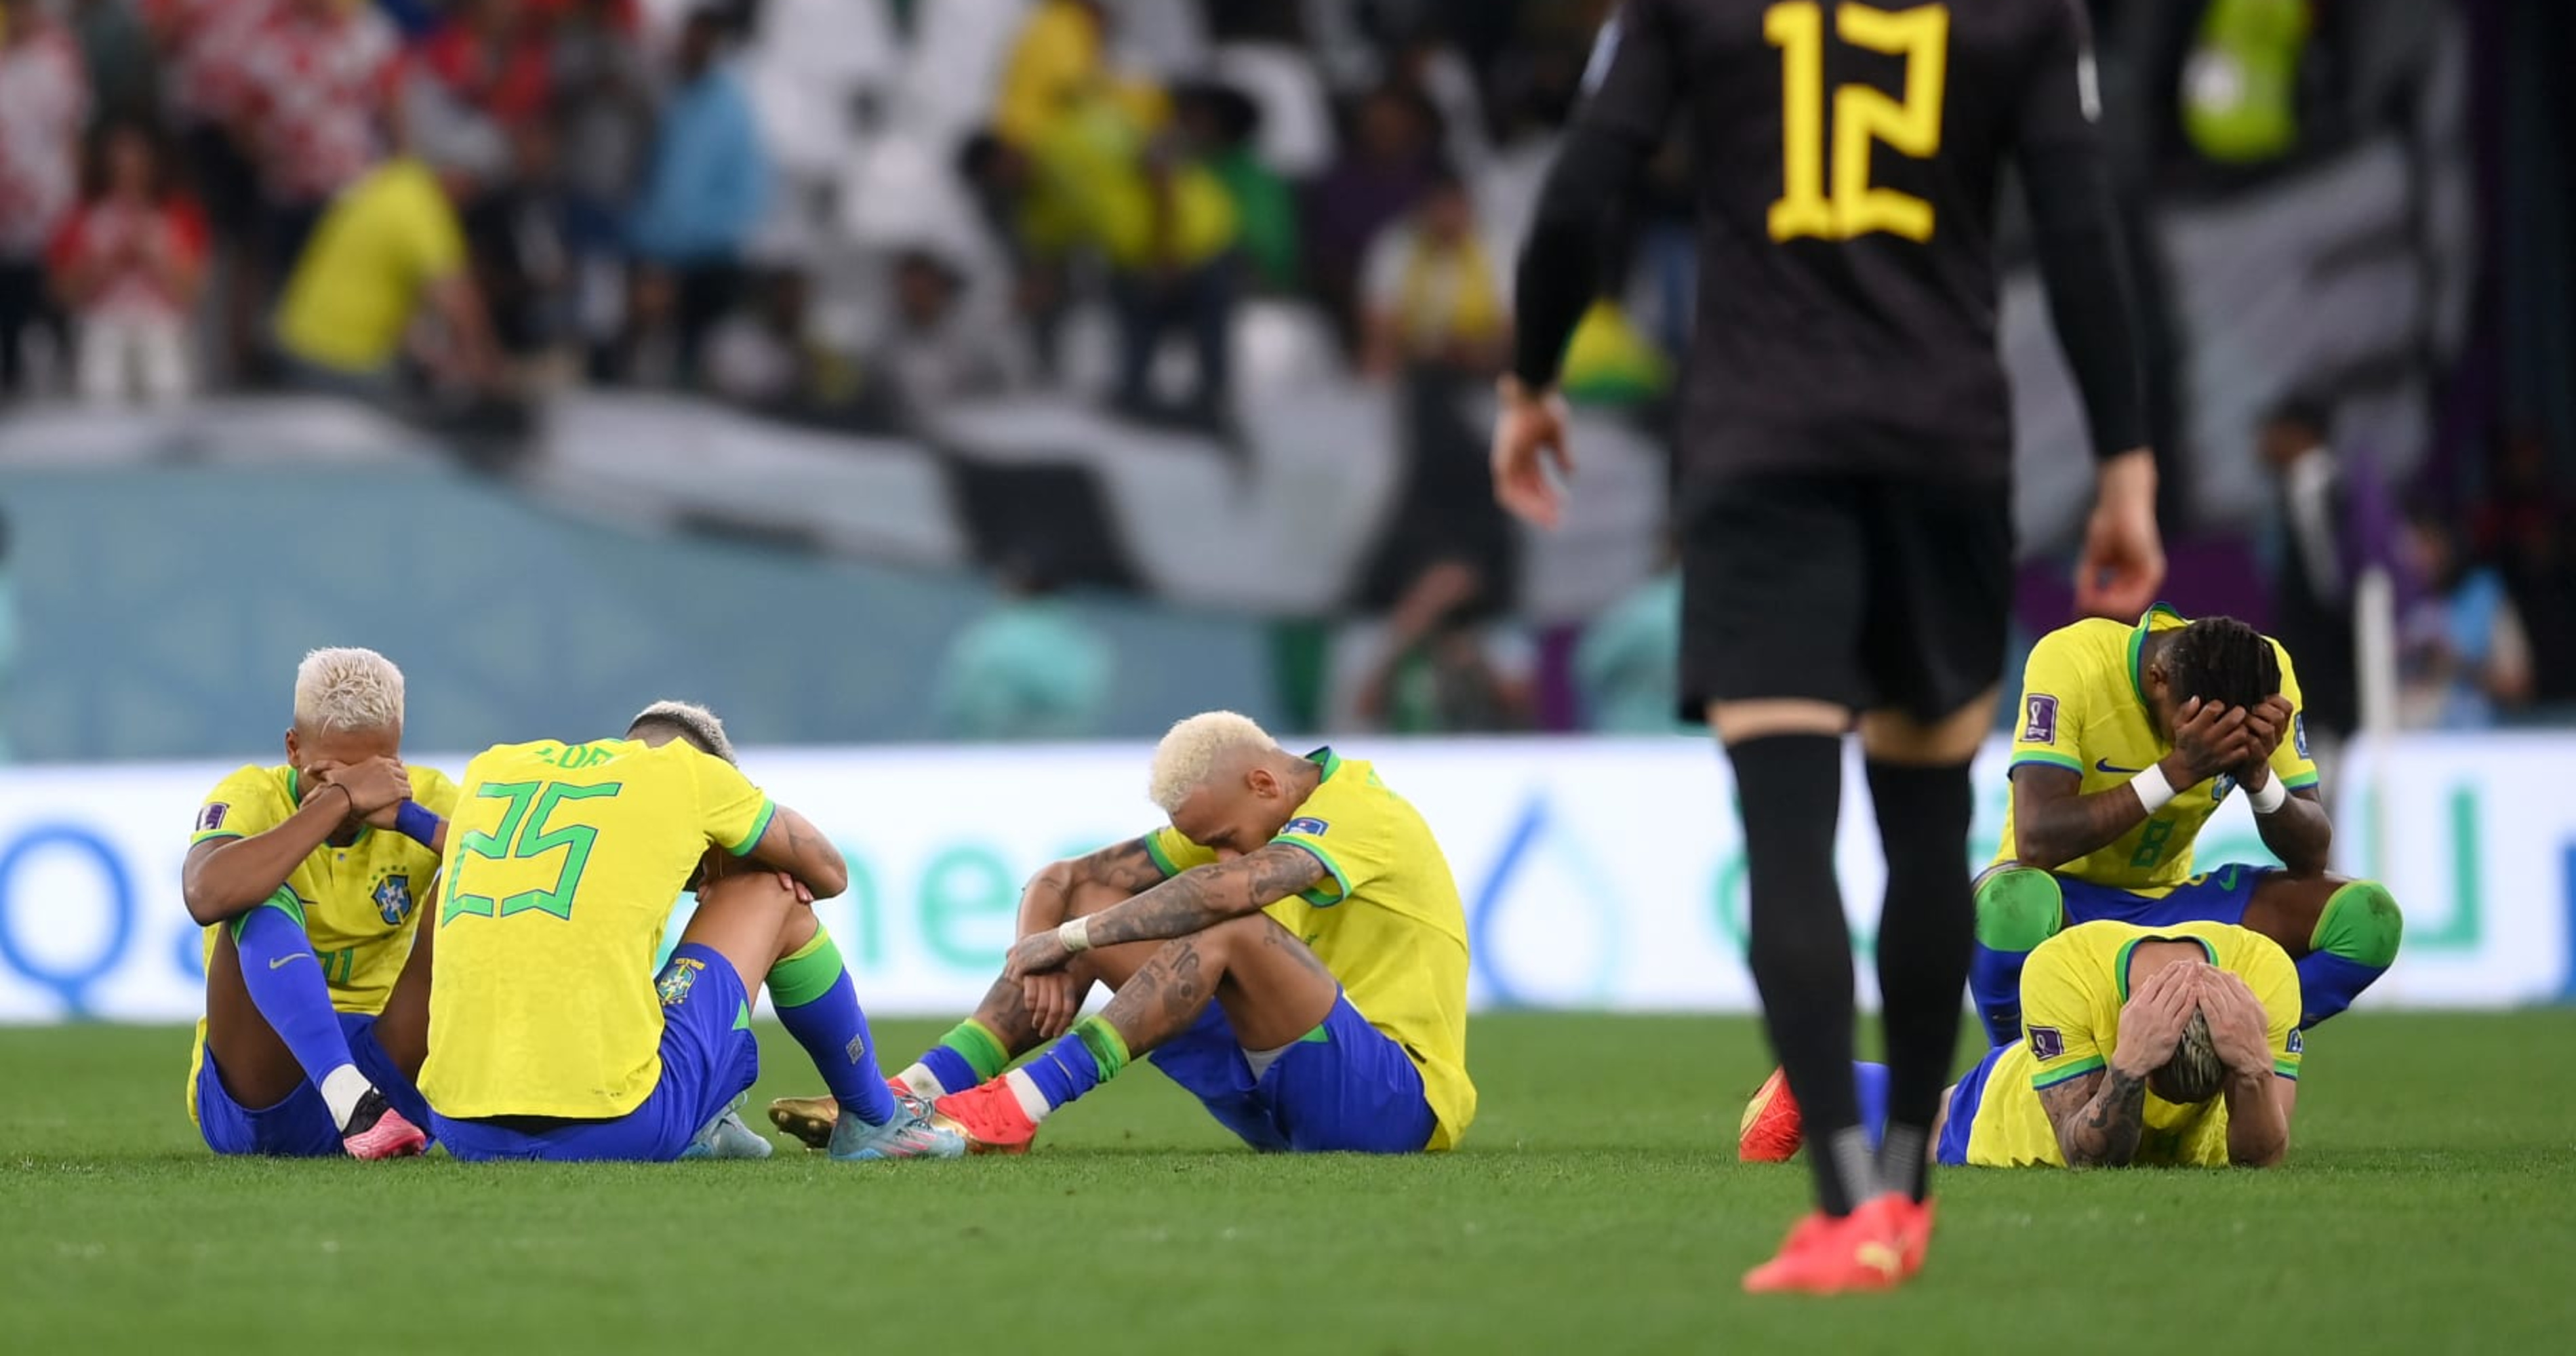 The Internet Reacts with Memes to Brazil Being Knocked Out of 2022